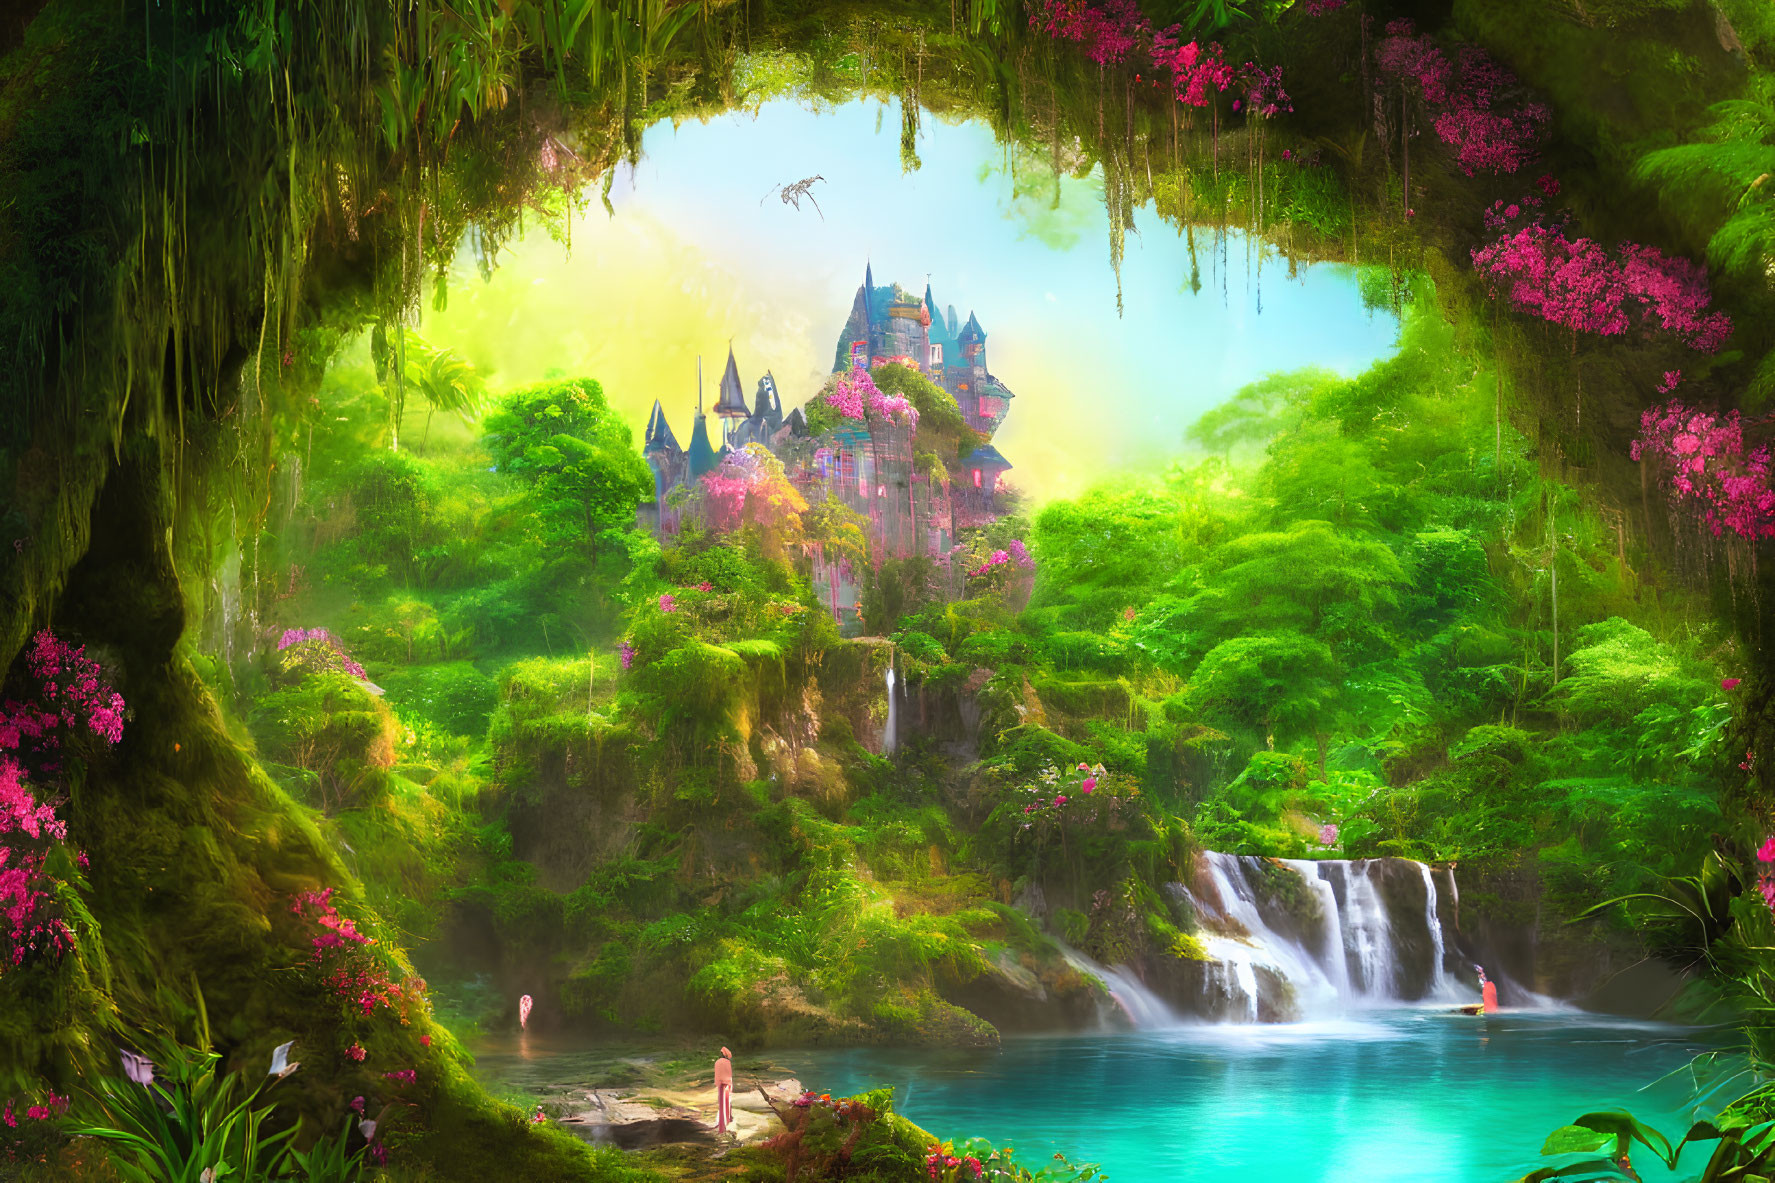 Castle in lush green fantasy landscape with waterfalls, lake, vibrant flora, and flamingos under glowing